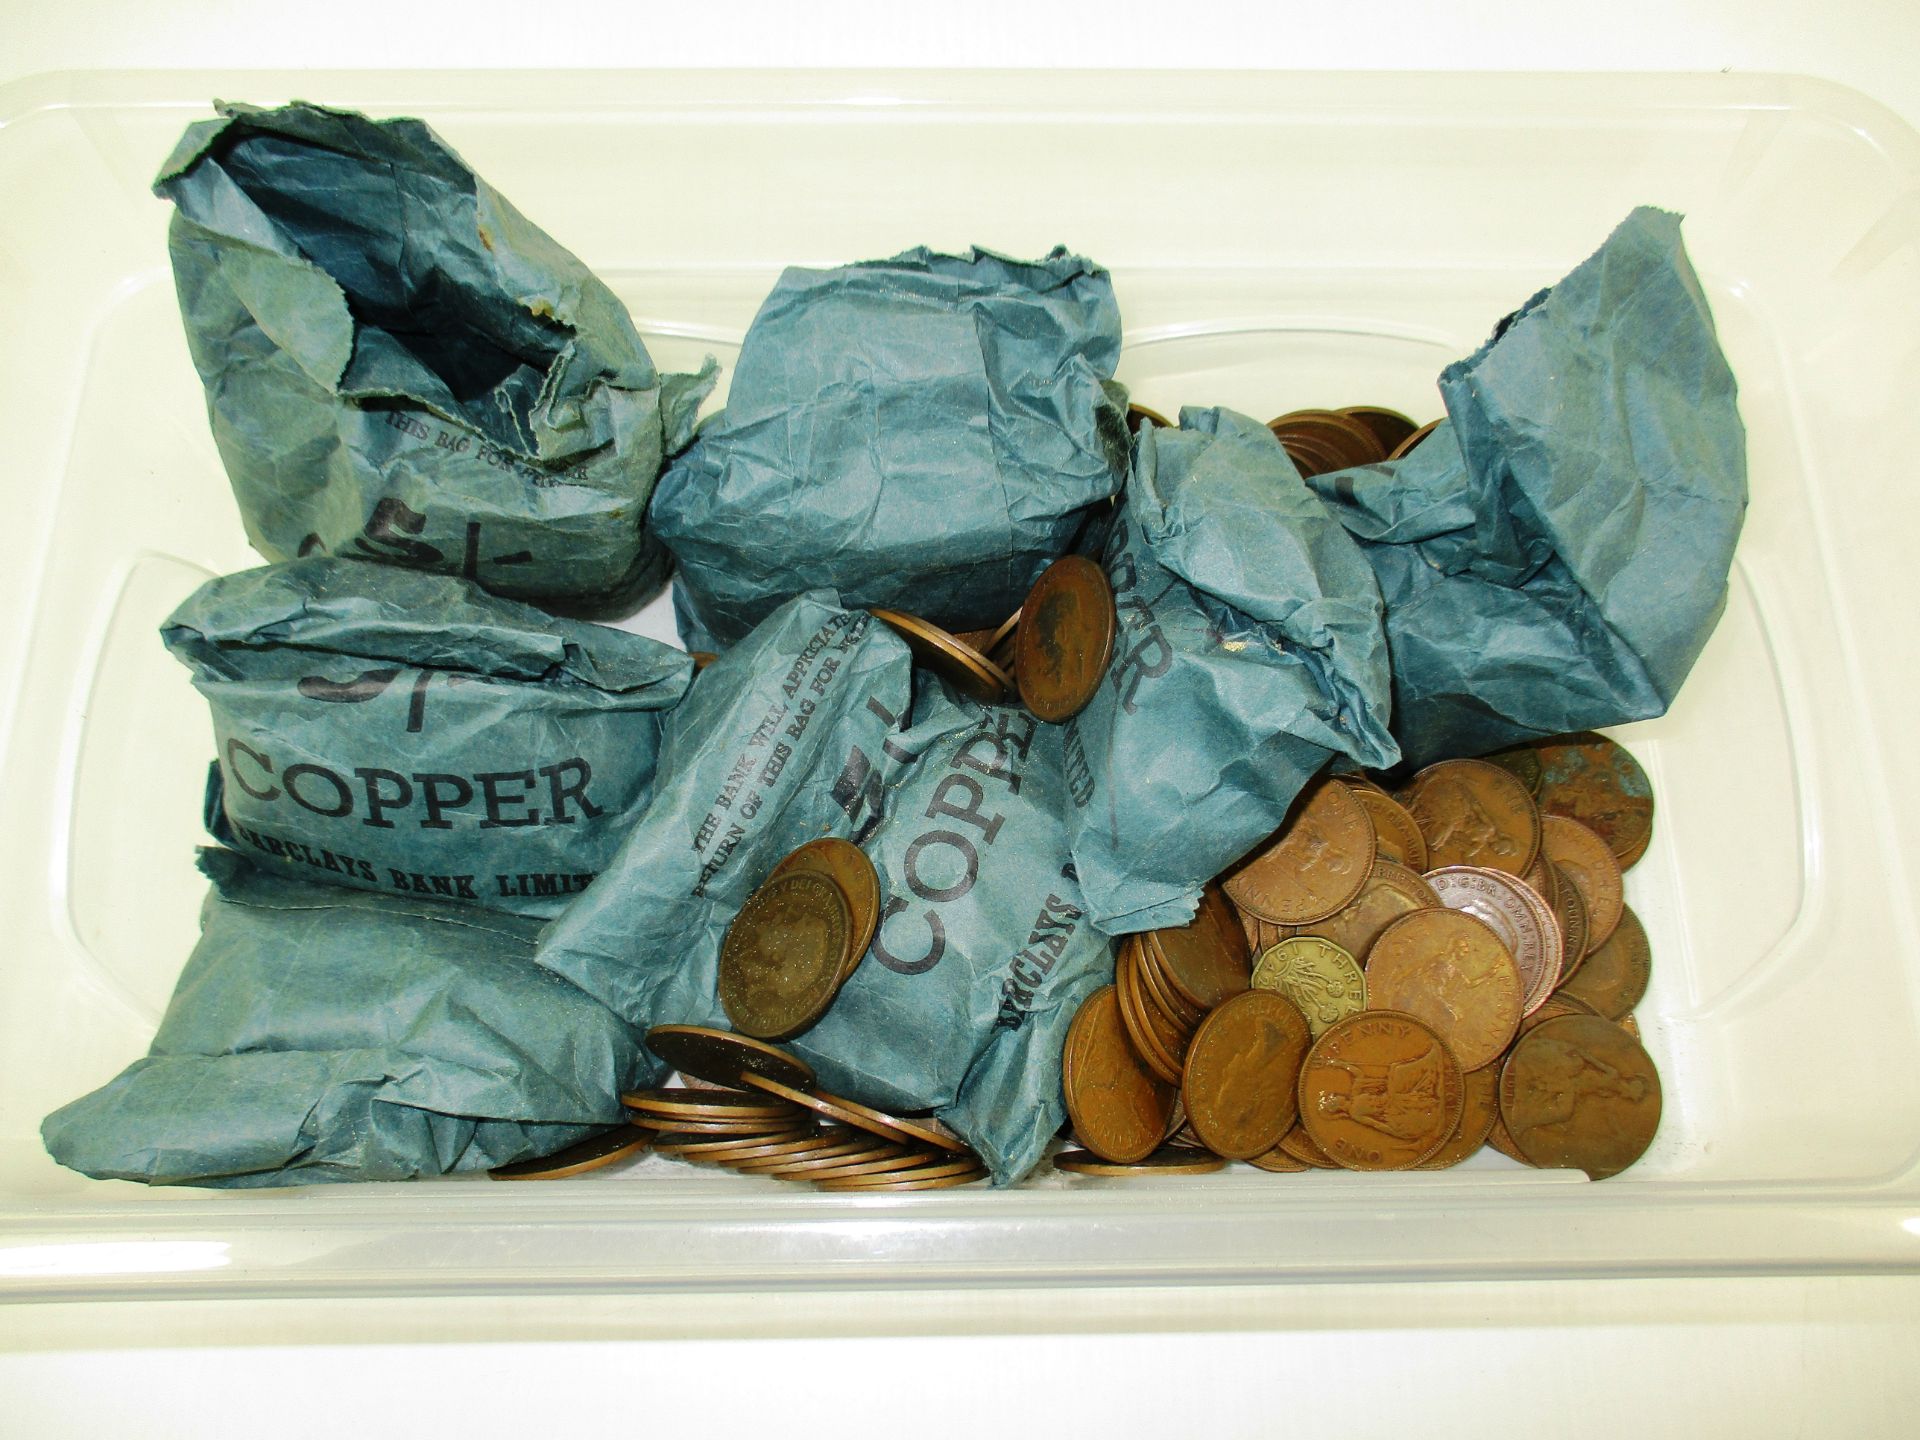 Contents to tray - large quantity of one penny coins